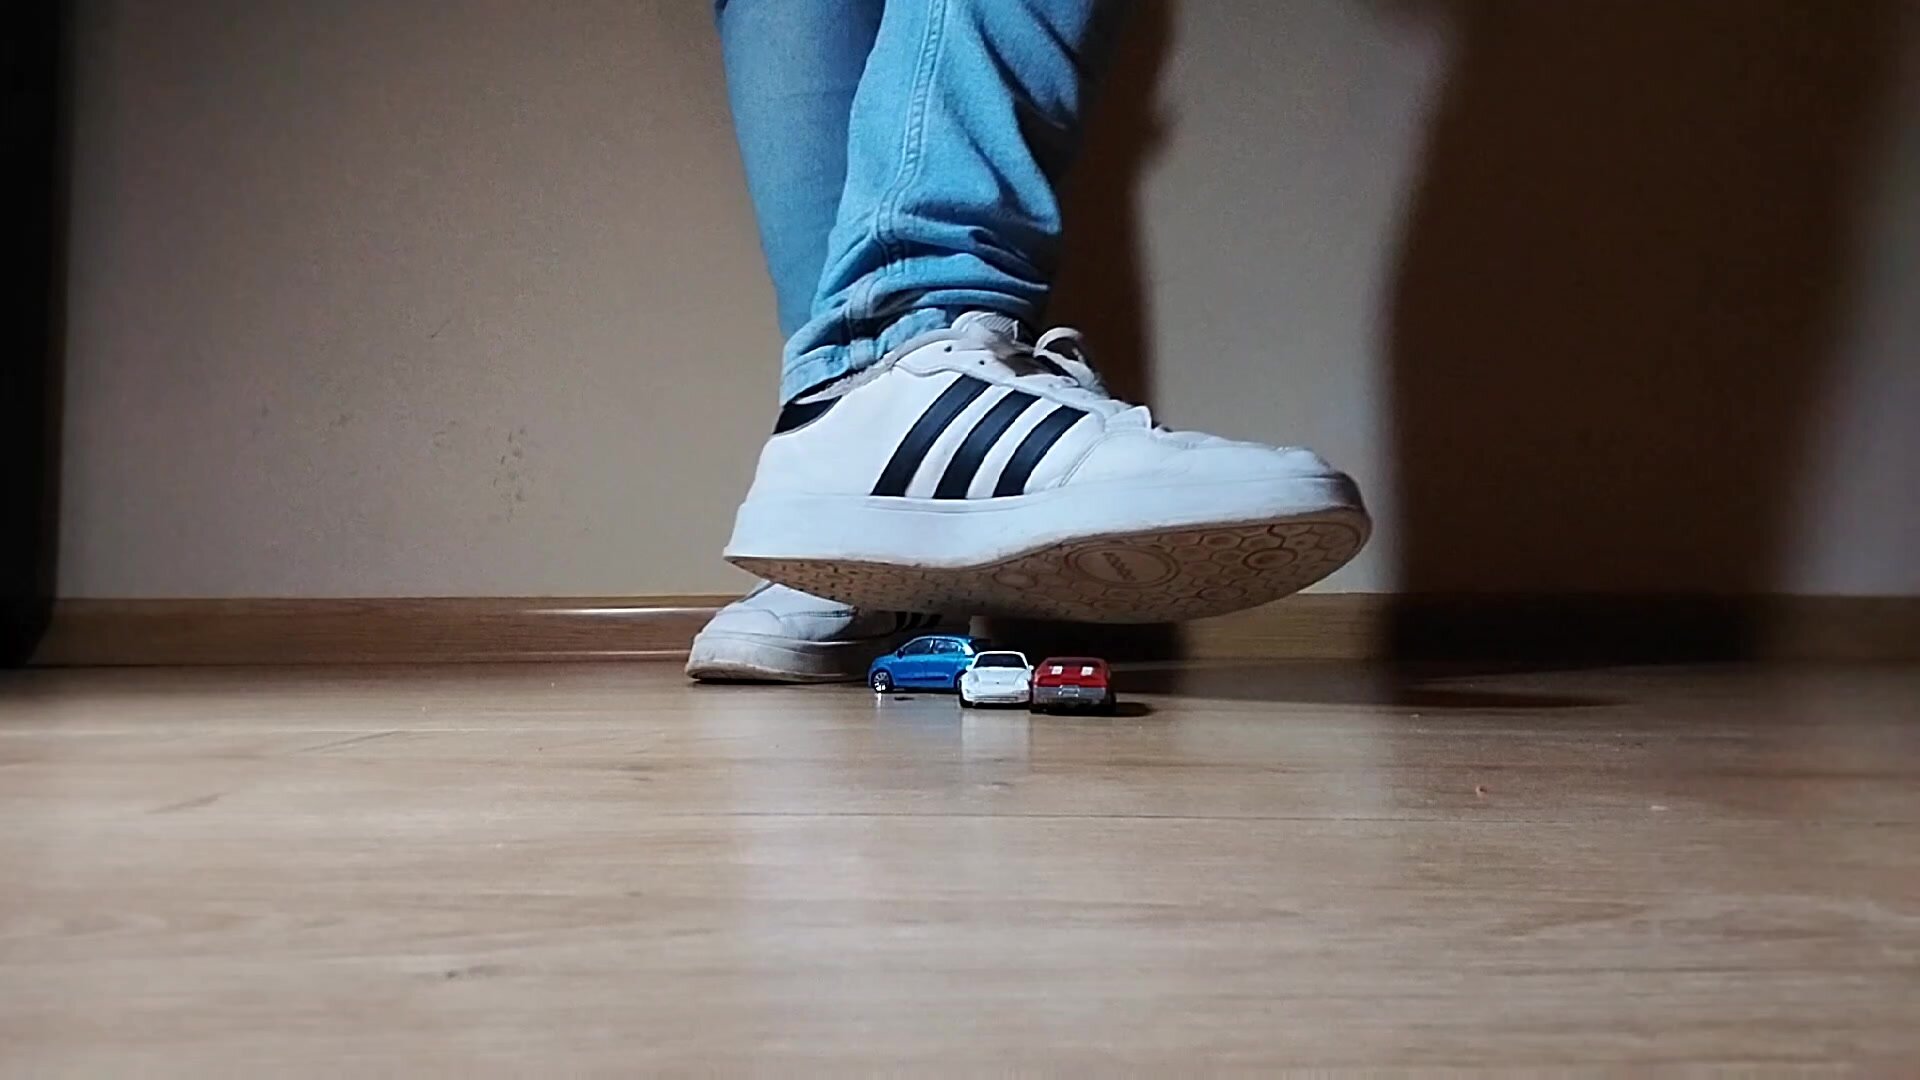 Male giant shoes trampling tiny cars